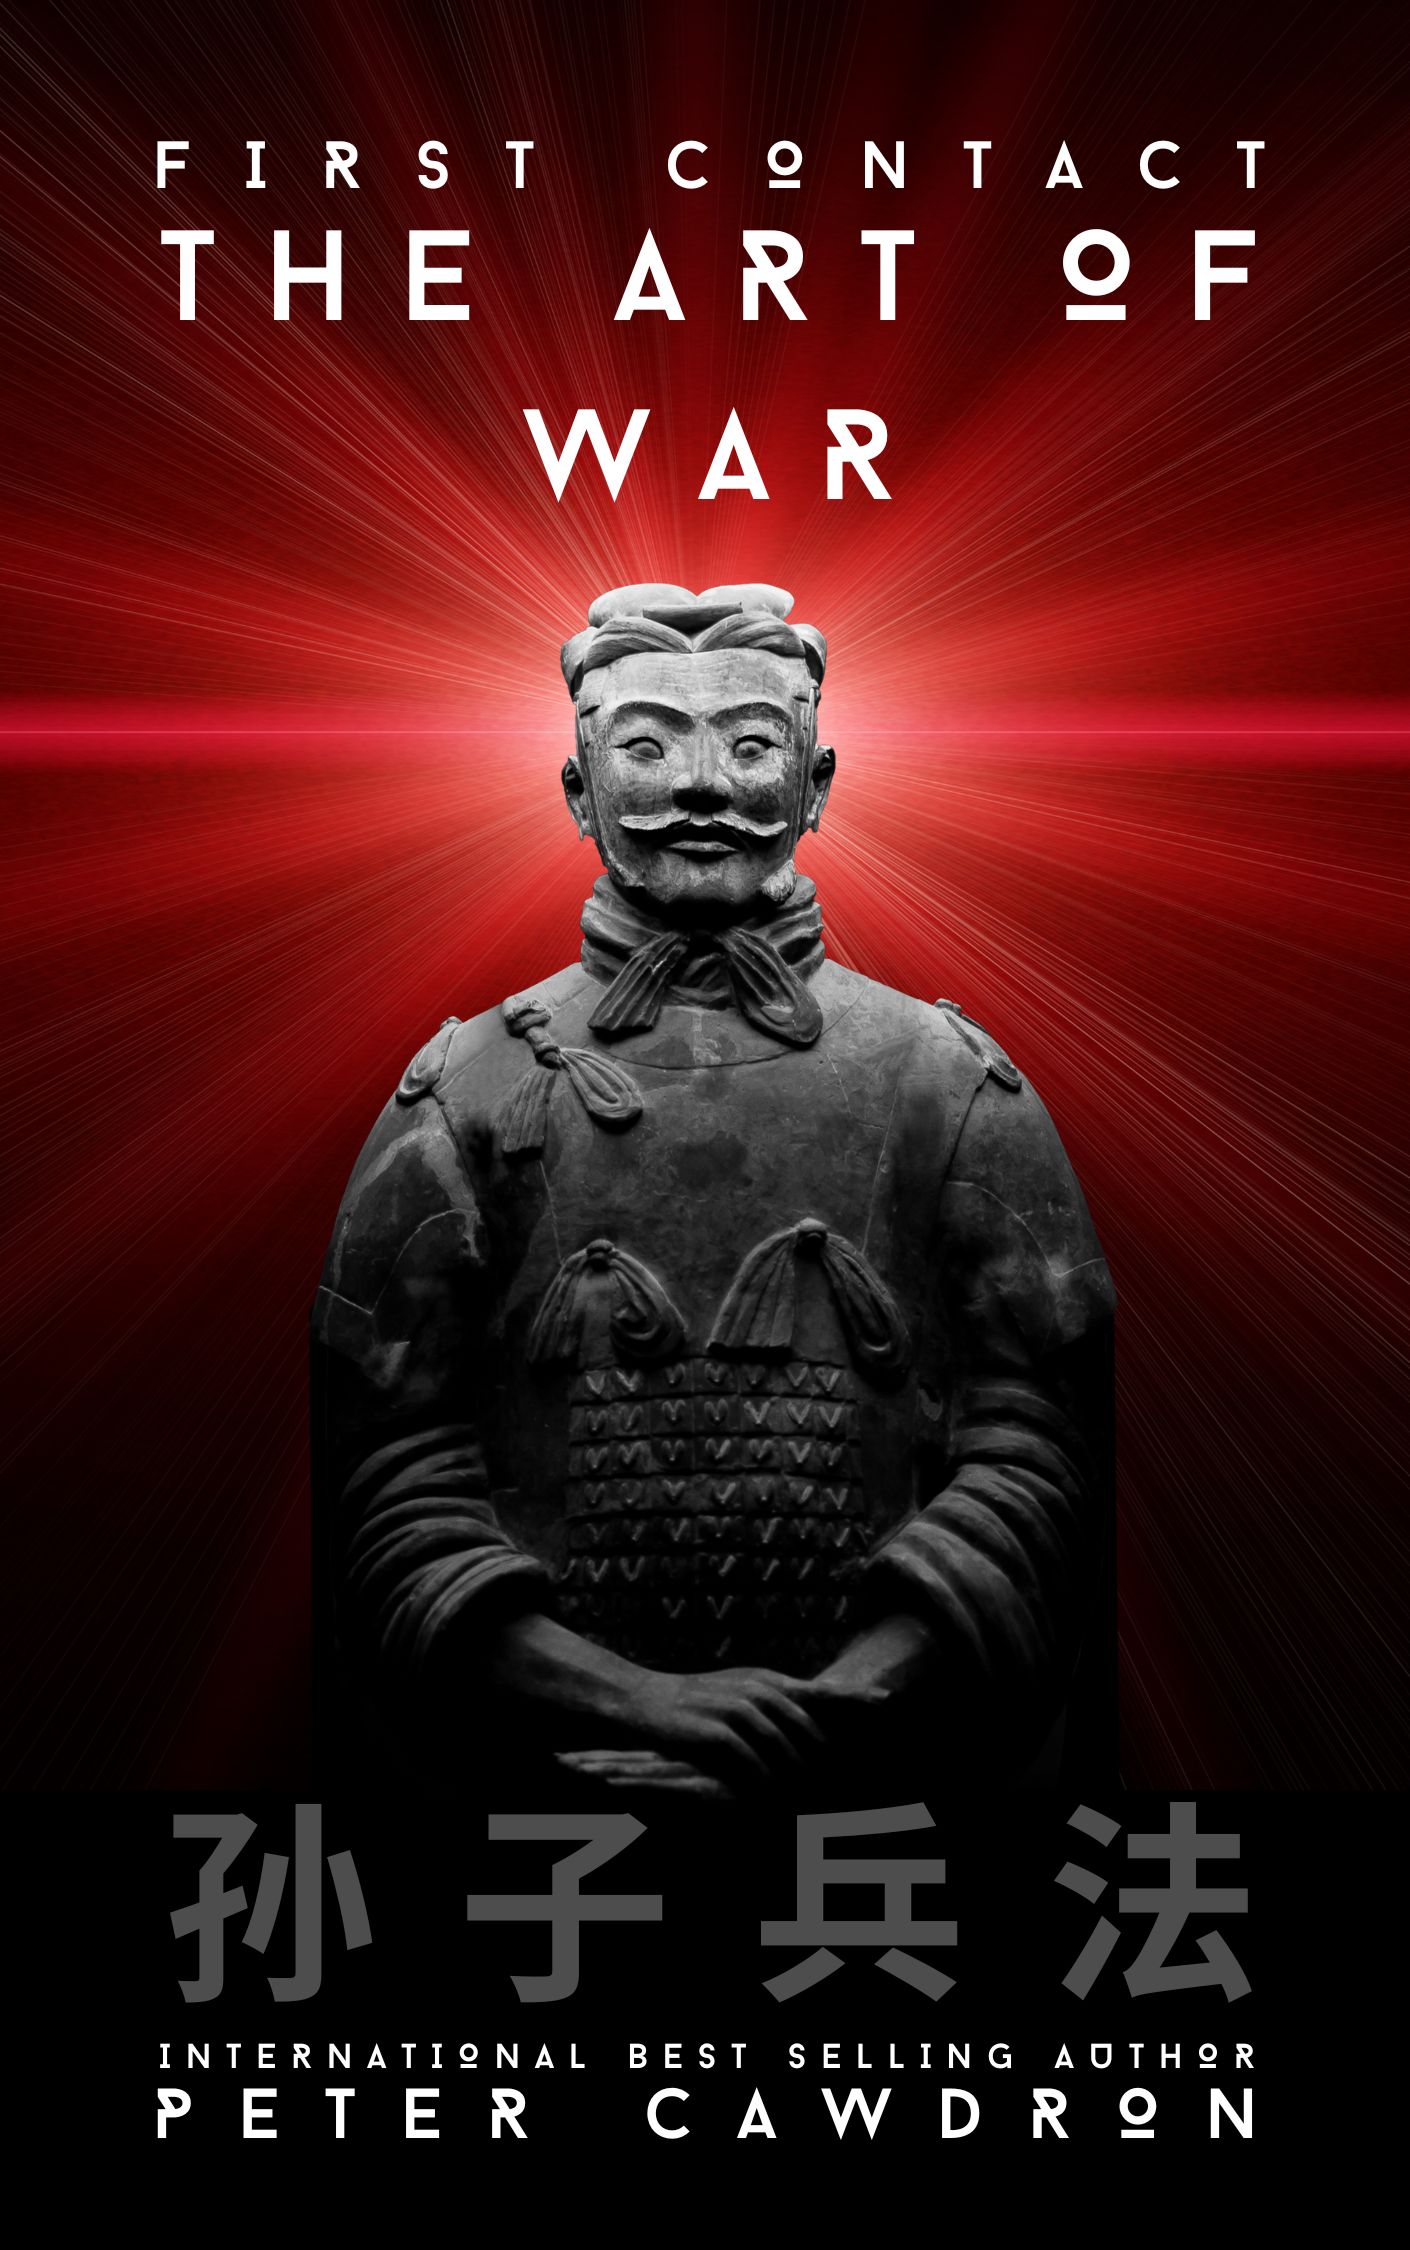 Terracotta soldier appears with red rays of light behind him